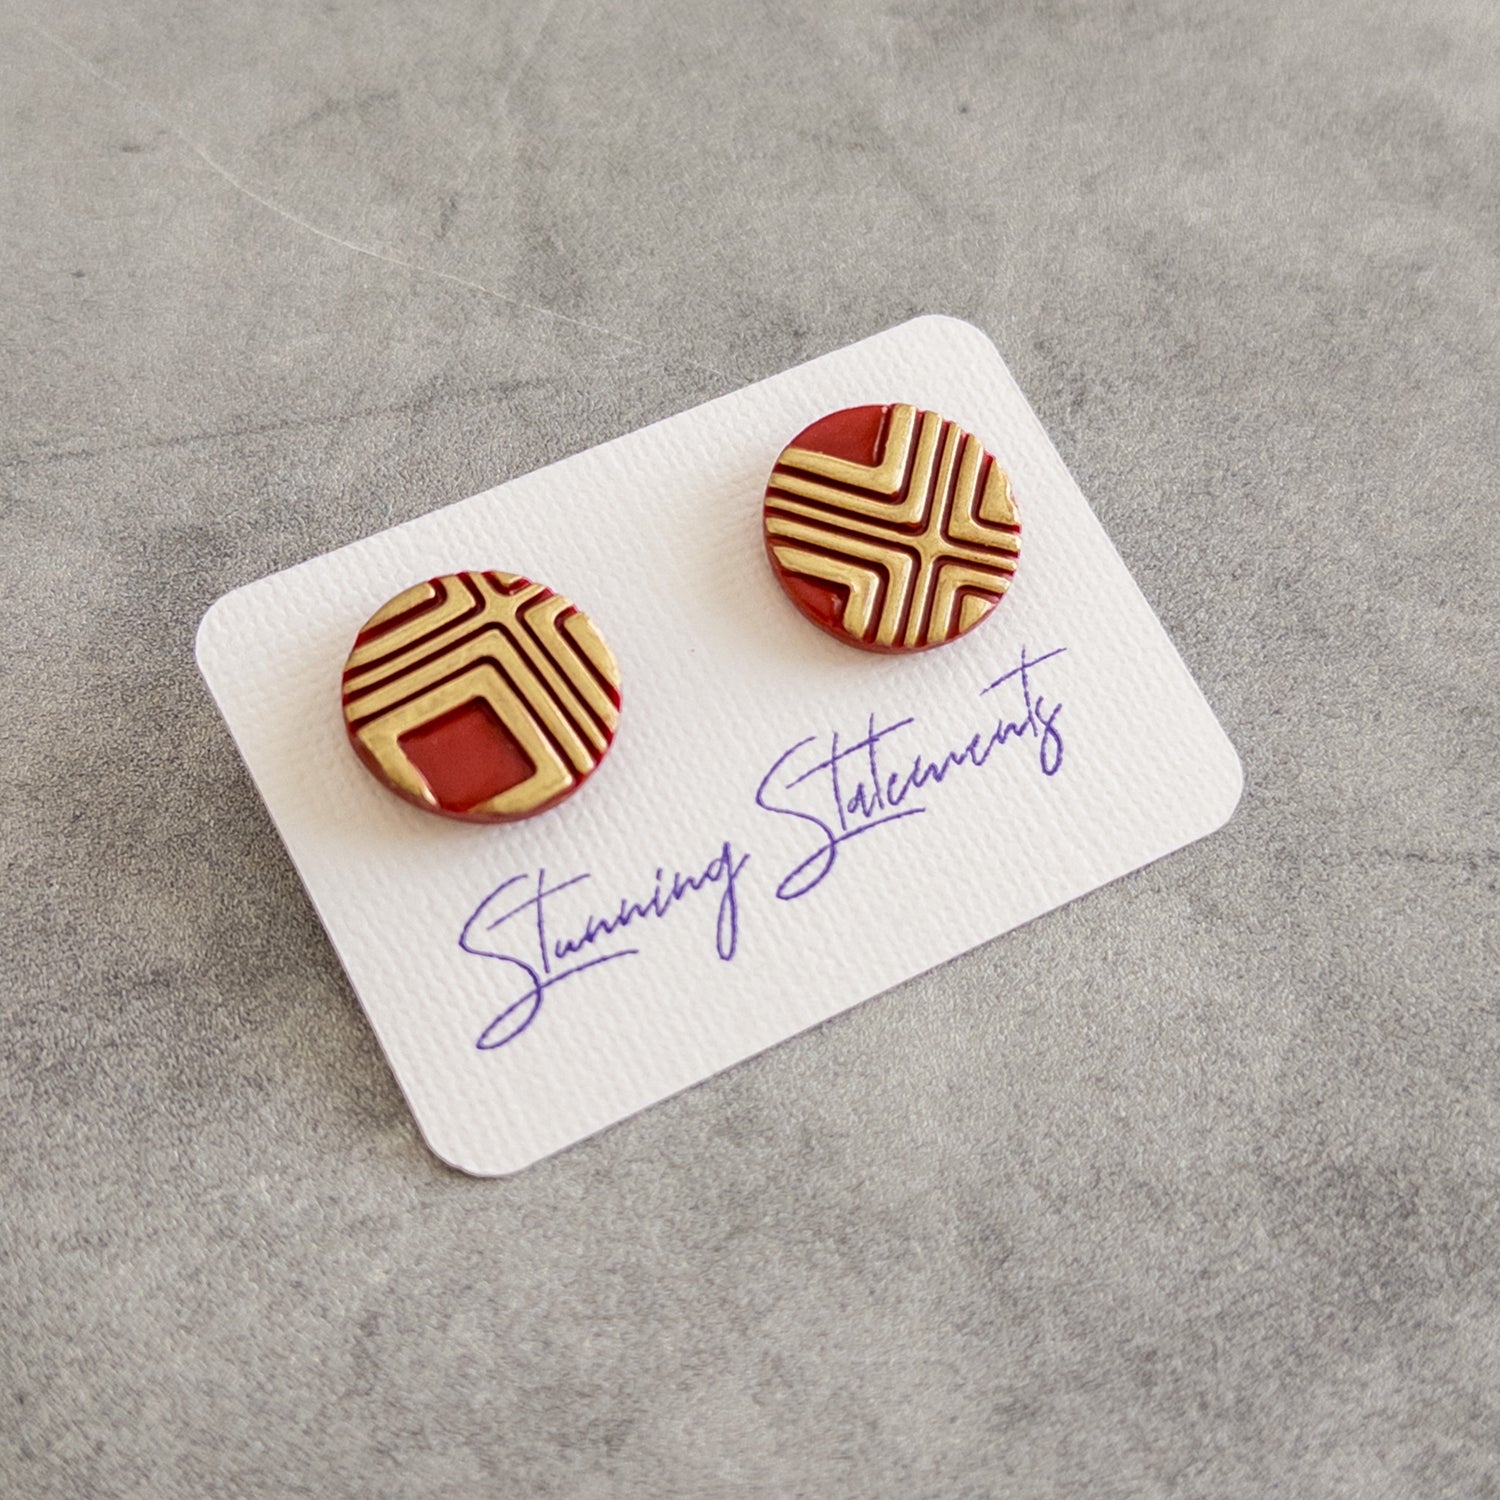 stunning statements textured bright bold colorful crimson cleo stud earrings